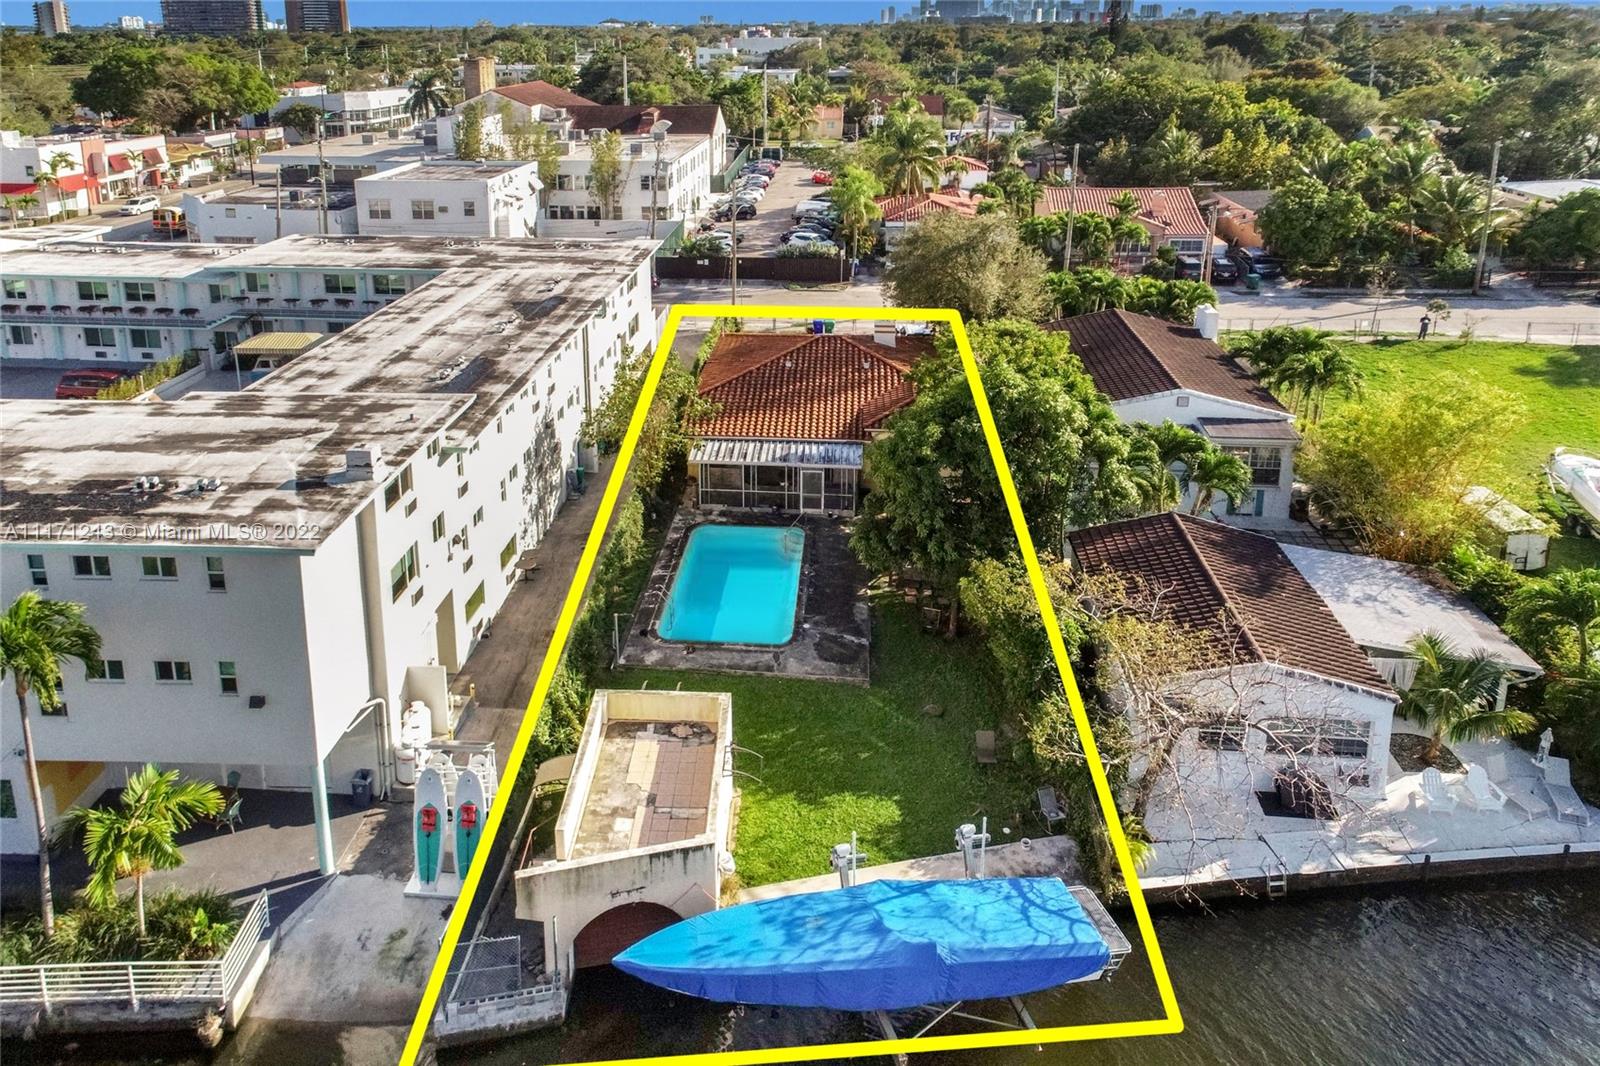 Whether you're on the hunt for a unique riverfront dwelling or an income-generating prospect in a highly desirable enclave in Miami, this must-see residence might be exactly what you're looking for! Known as the first property along the Little River, this iconic gem enjoys the privacy of a rear-end lot while offering an expansive deep water frontage. Grab the chance to reimagine your custom dream home or restore its original 4-bed, 1-bath layout that comes with a pool in the backyard.  Multiple features maximize the location perks, including a  60-ft dock equipped with amp power and a remote-controlled lift for the avid boating enthusiasts. There's also a  boathouse with its own gasoline station and independent breakers.  Short distance Design District, Art Basel, and Wynwood.